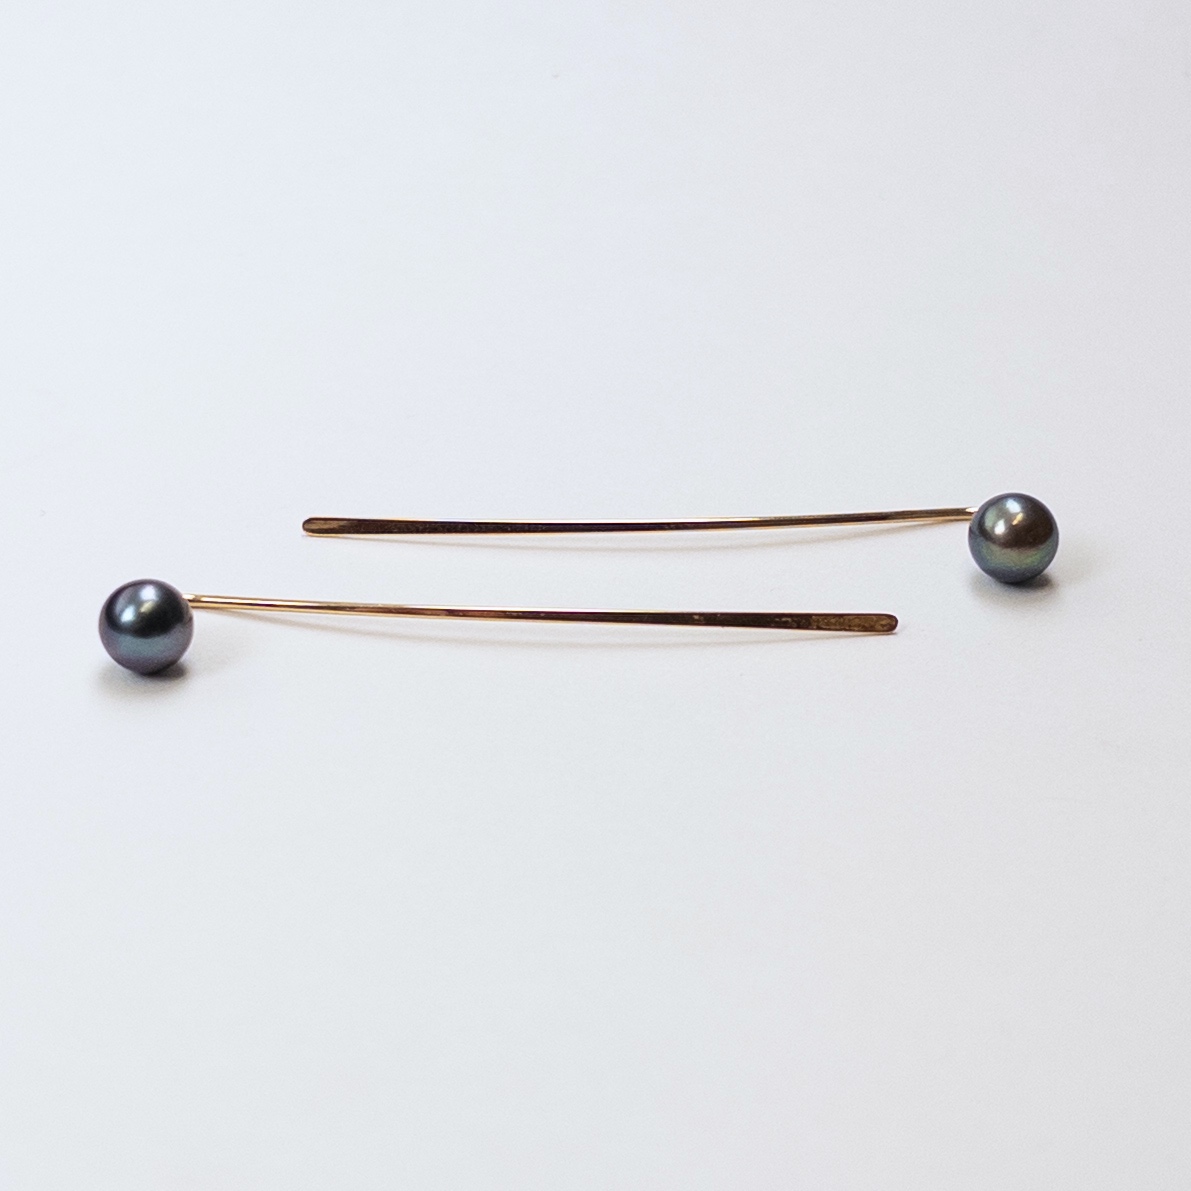 14K Gold Wire Earrings with Tahitian Pearls